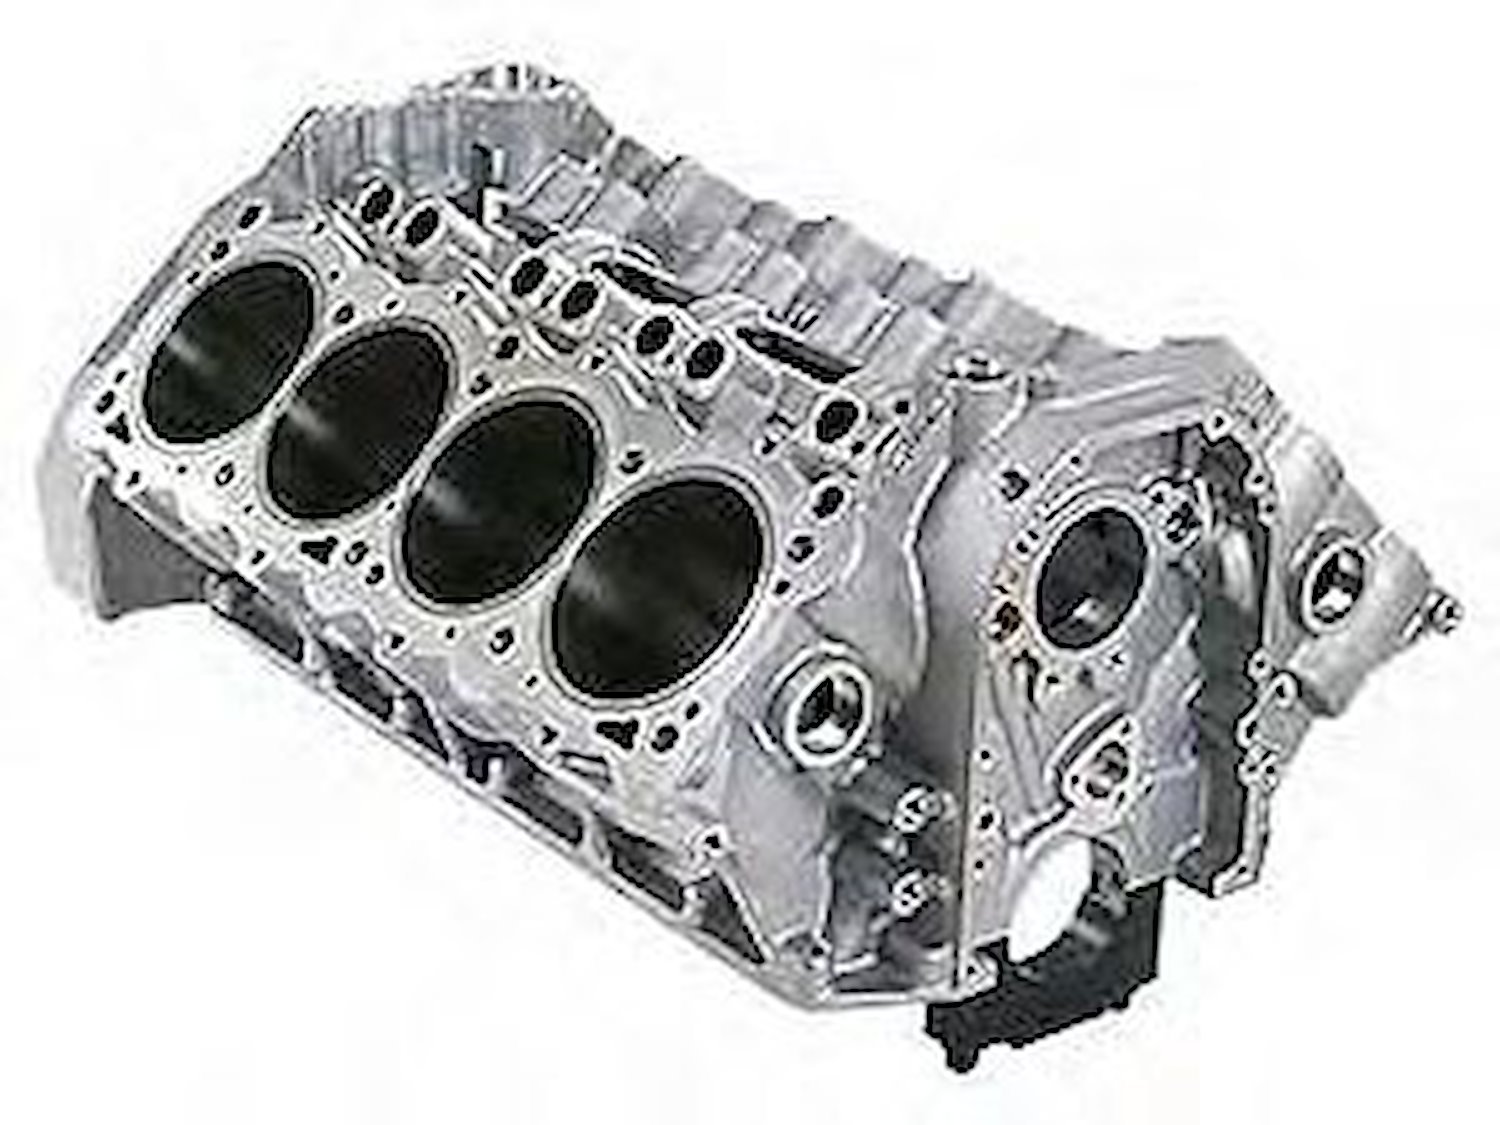 A8 Aluminum Engine Block Fits W9 or W9RP